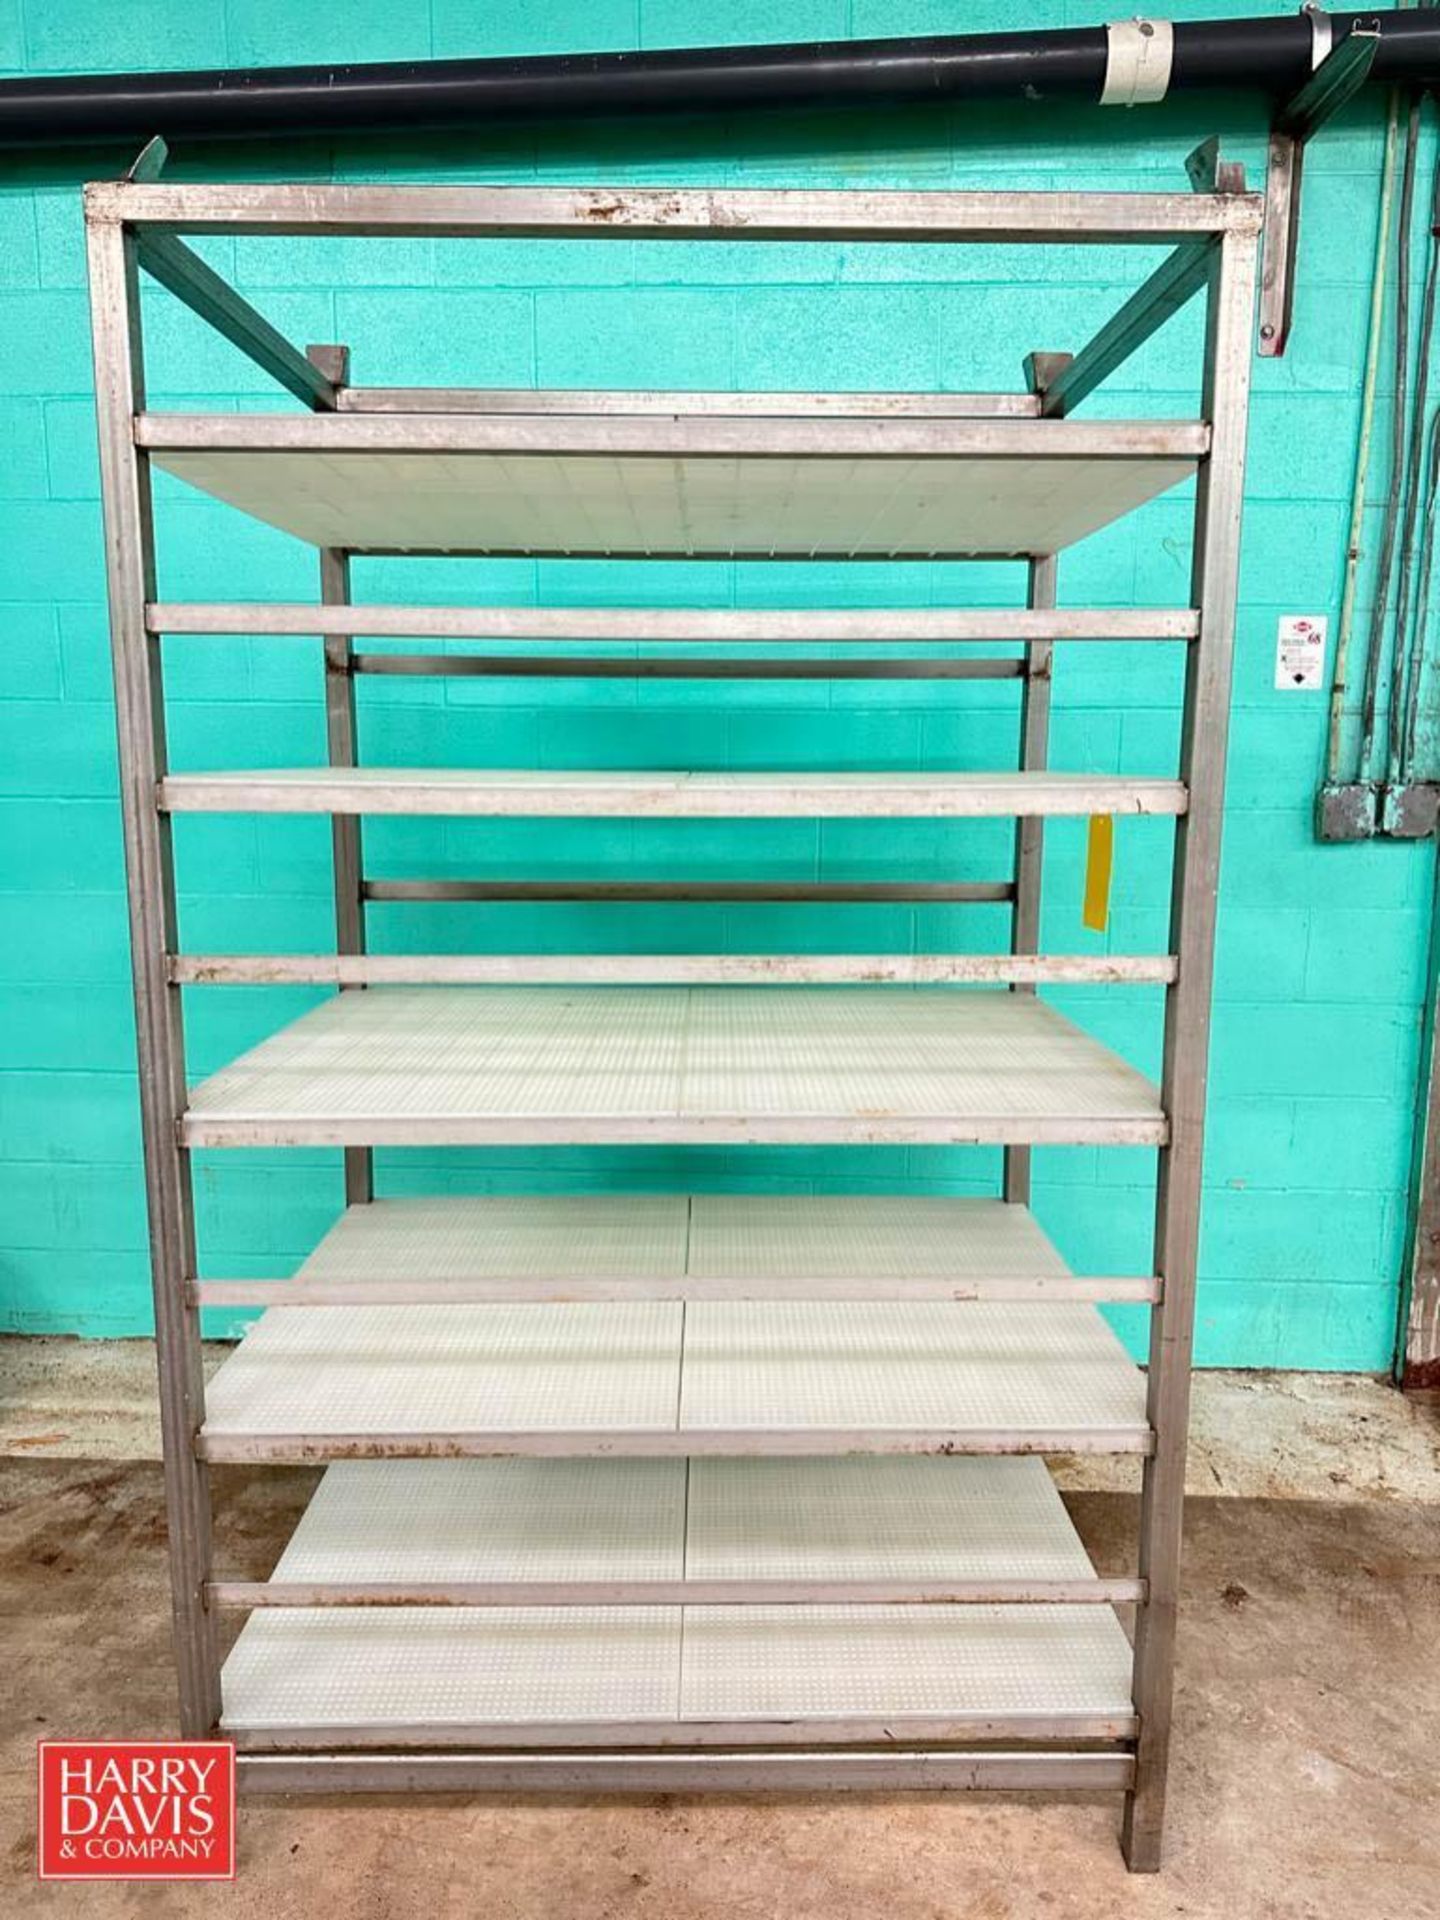 S/S Racks: 74" x 32" x 46" Depth with Poly Shelves and Case Trays - Rigging Fee: $175